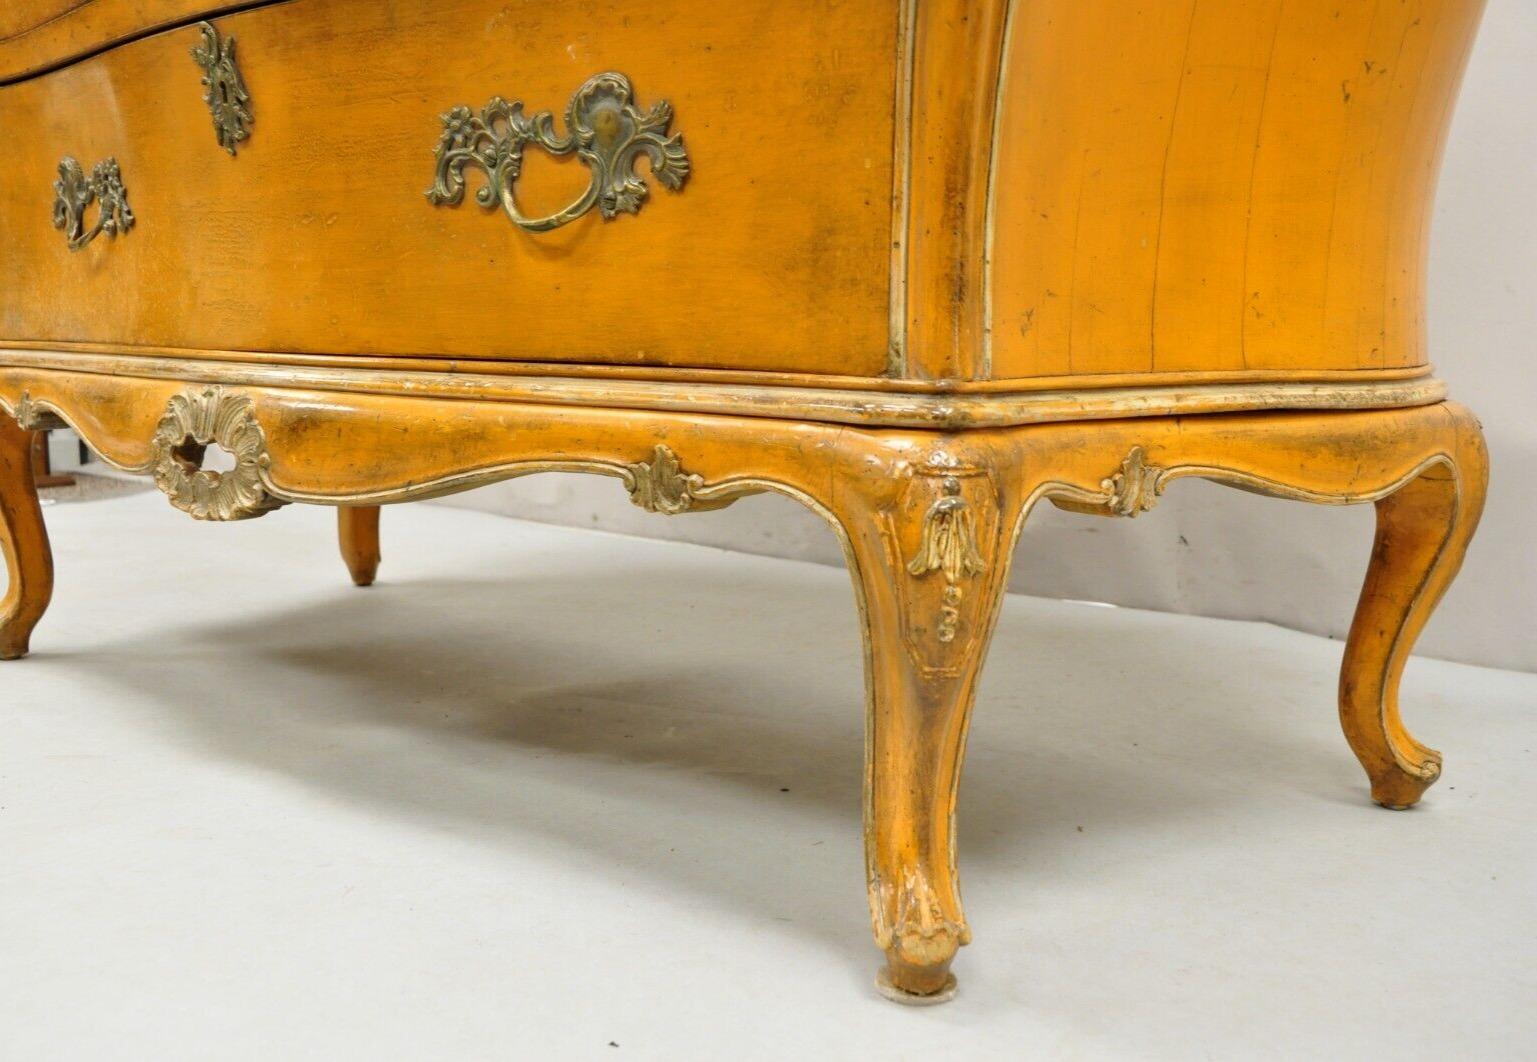 Antique Italian Rococo Orange Painted Bombe Commode Chest of Drawers In Good Condition For Sale In Philadelphia, PA